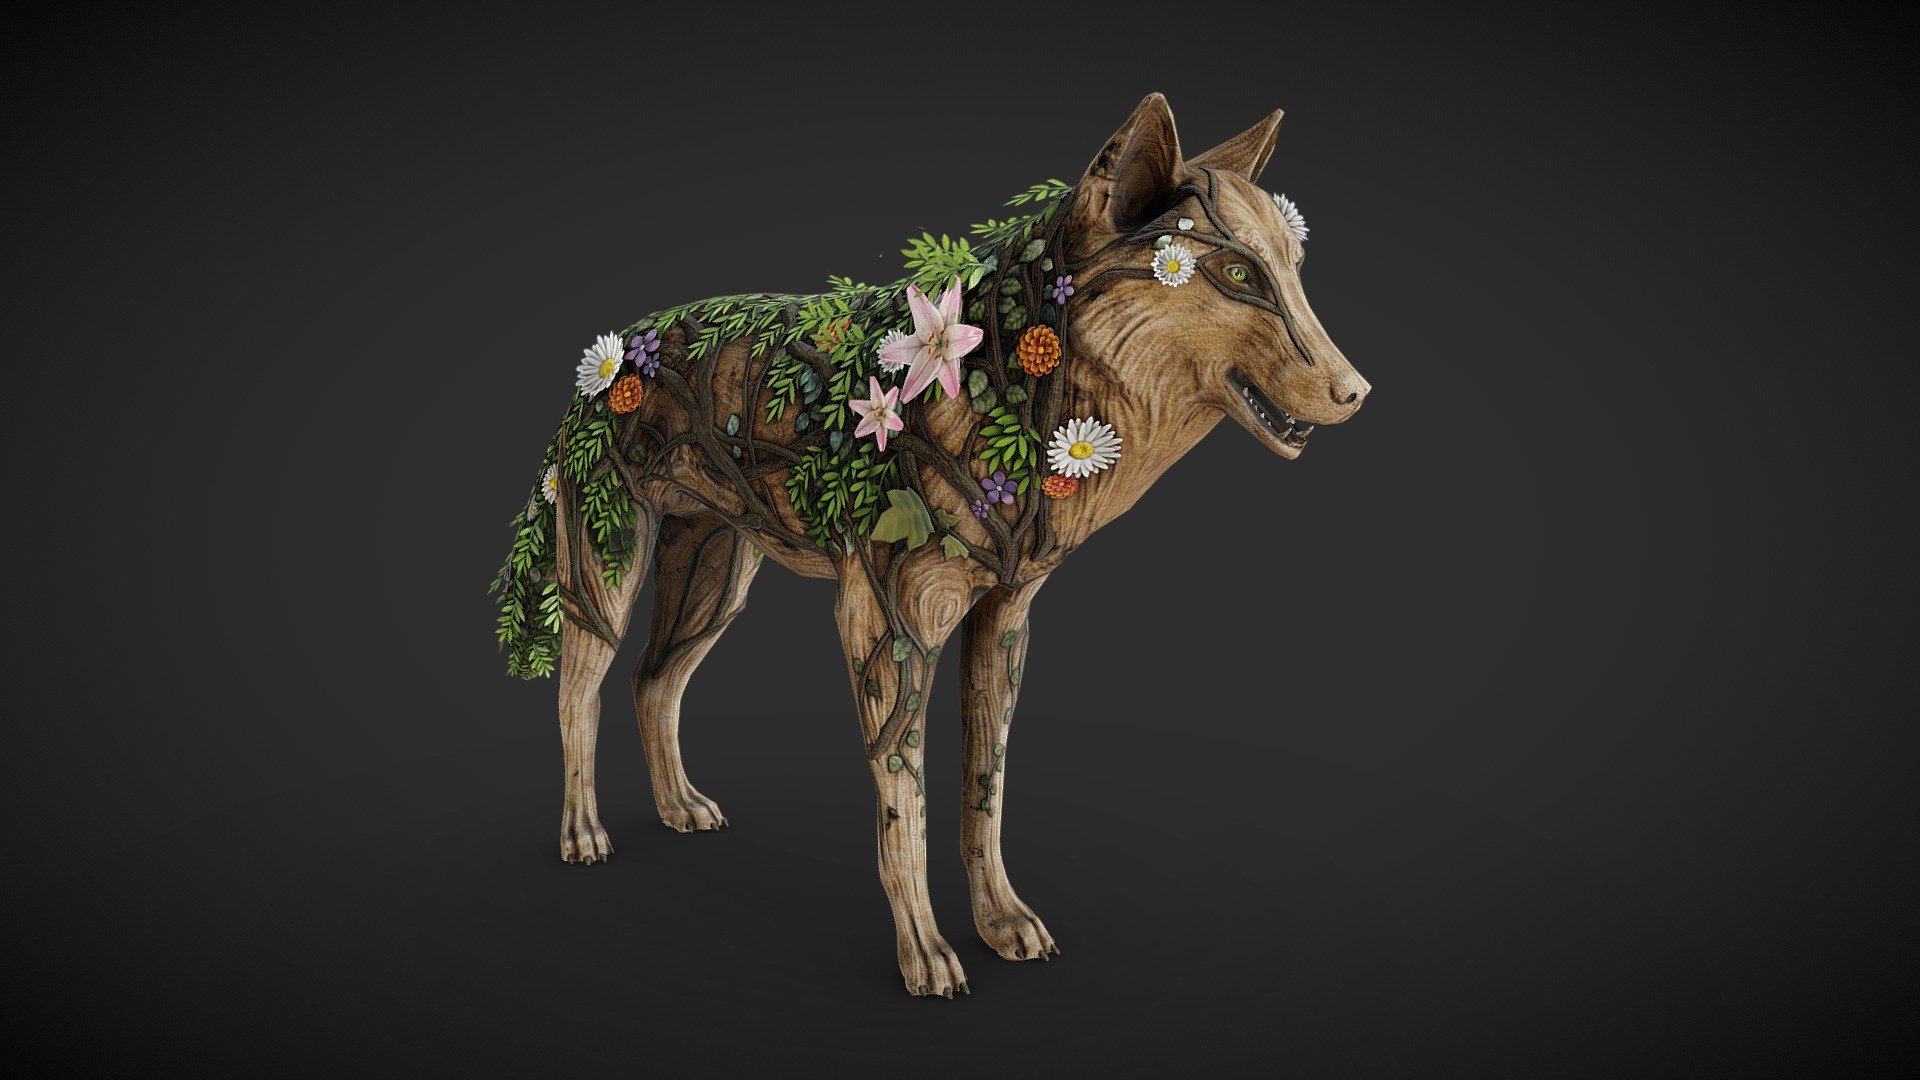 Wolf of Nature model was made as International Earth Day event animal for the mobile game Wild Hunt for Ten Square Games. Sculpture made in Zbrush, retopology and uv-mapping in Blender, textures in Substance Painter 3d model